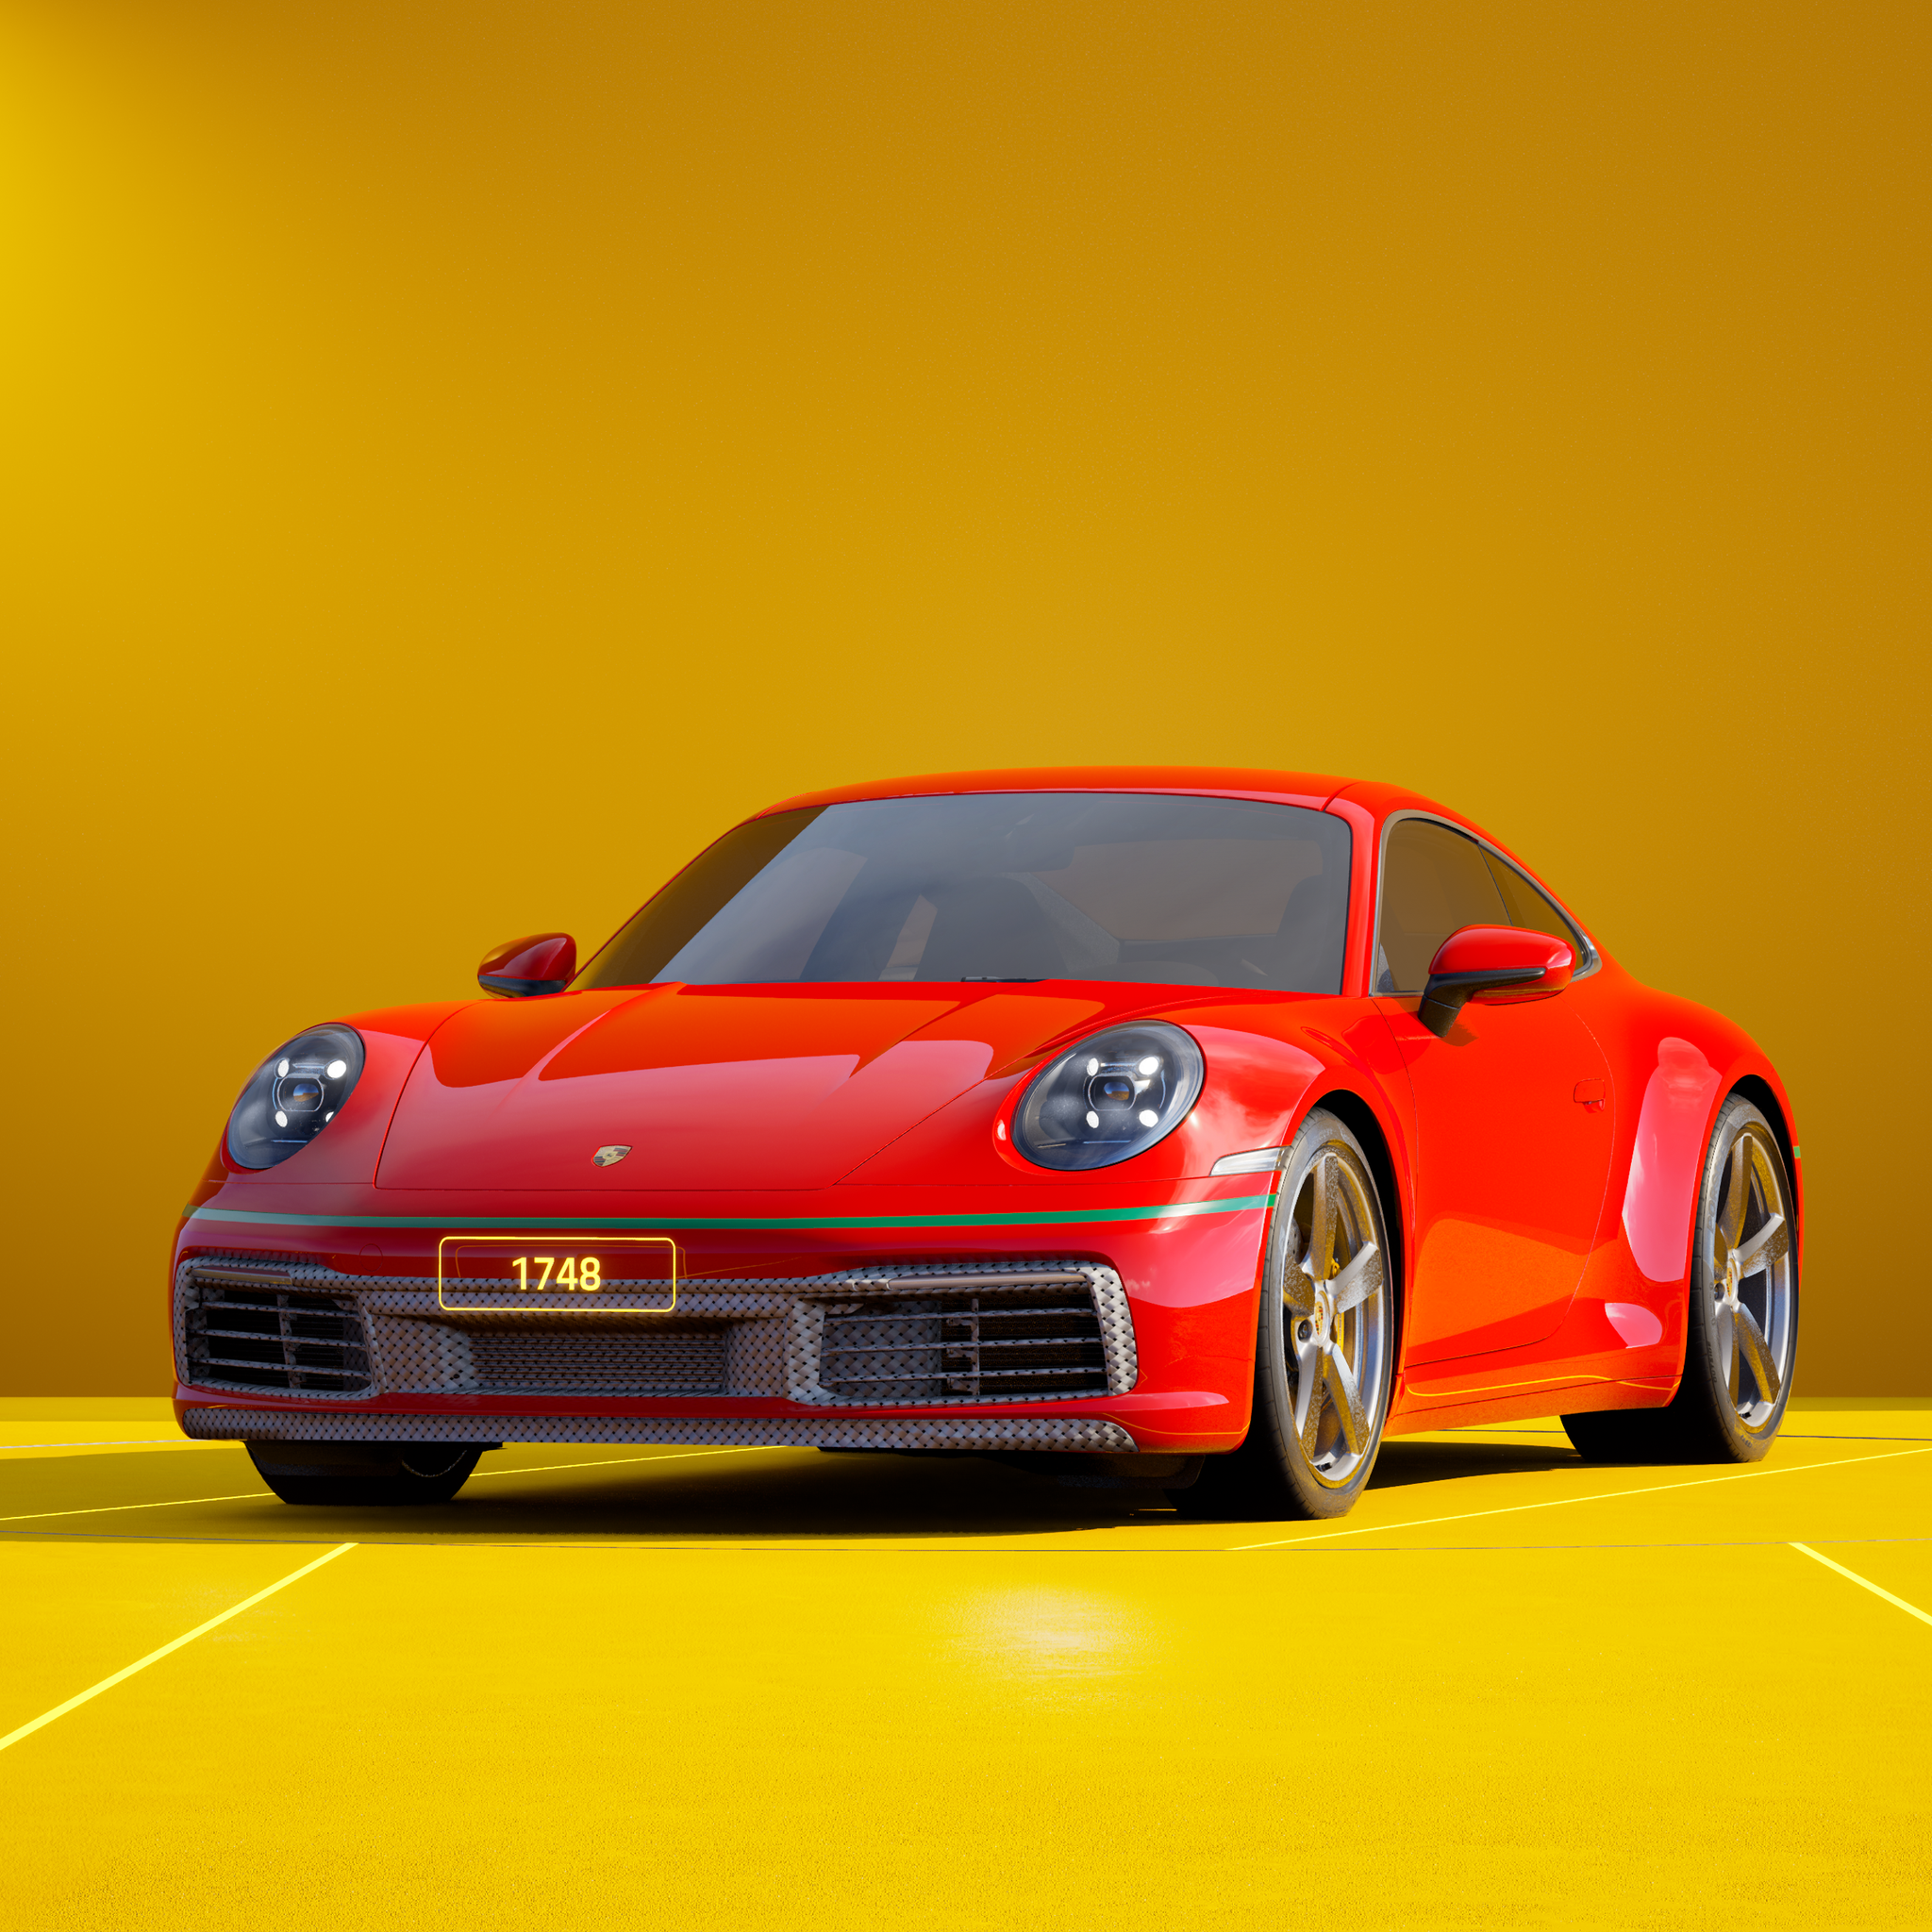 The PORSCHΞ 911 1748 image in phase